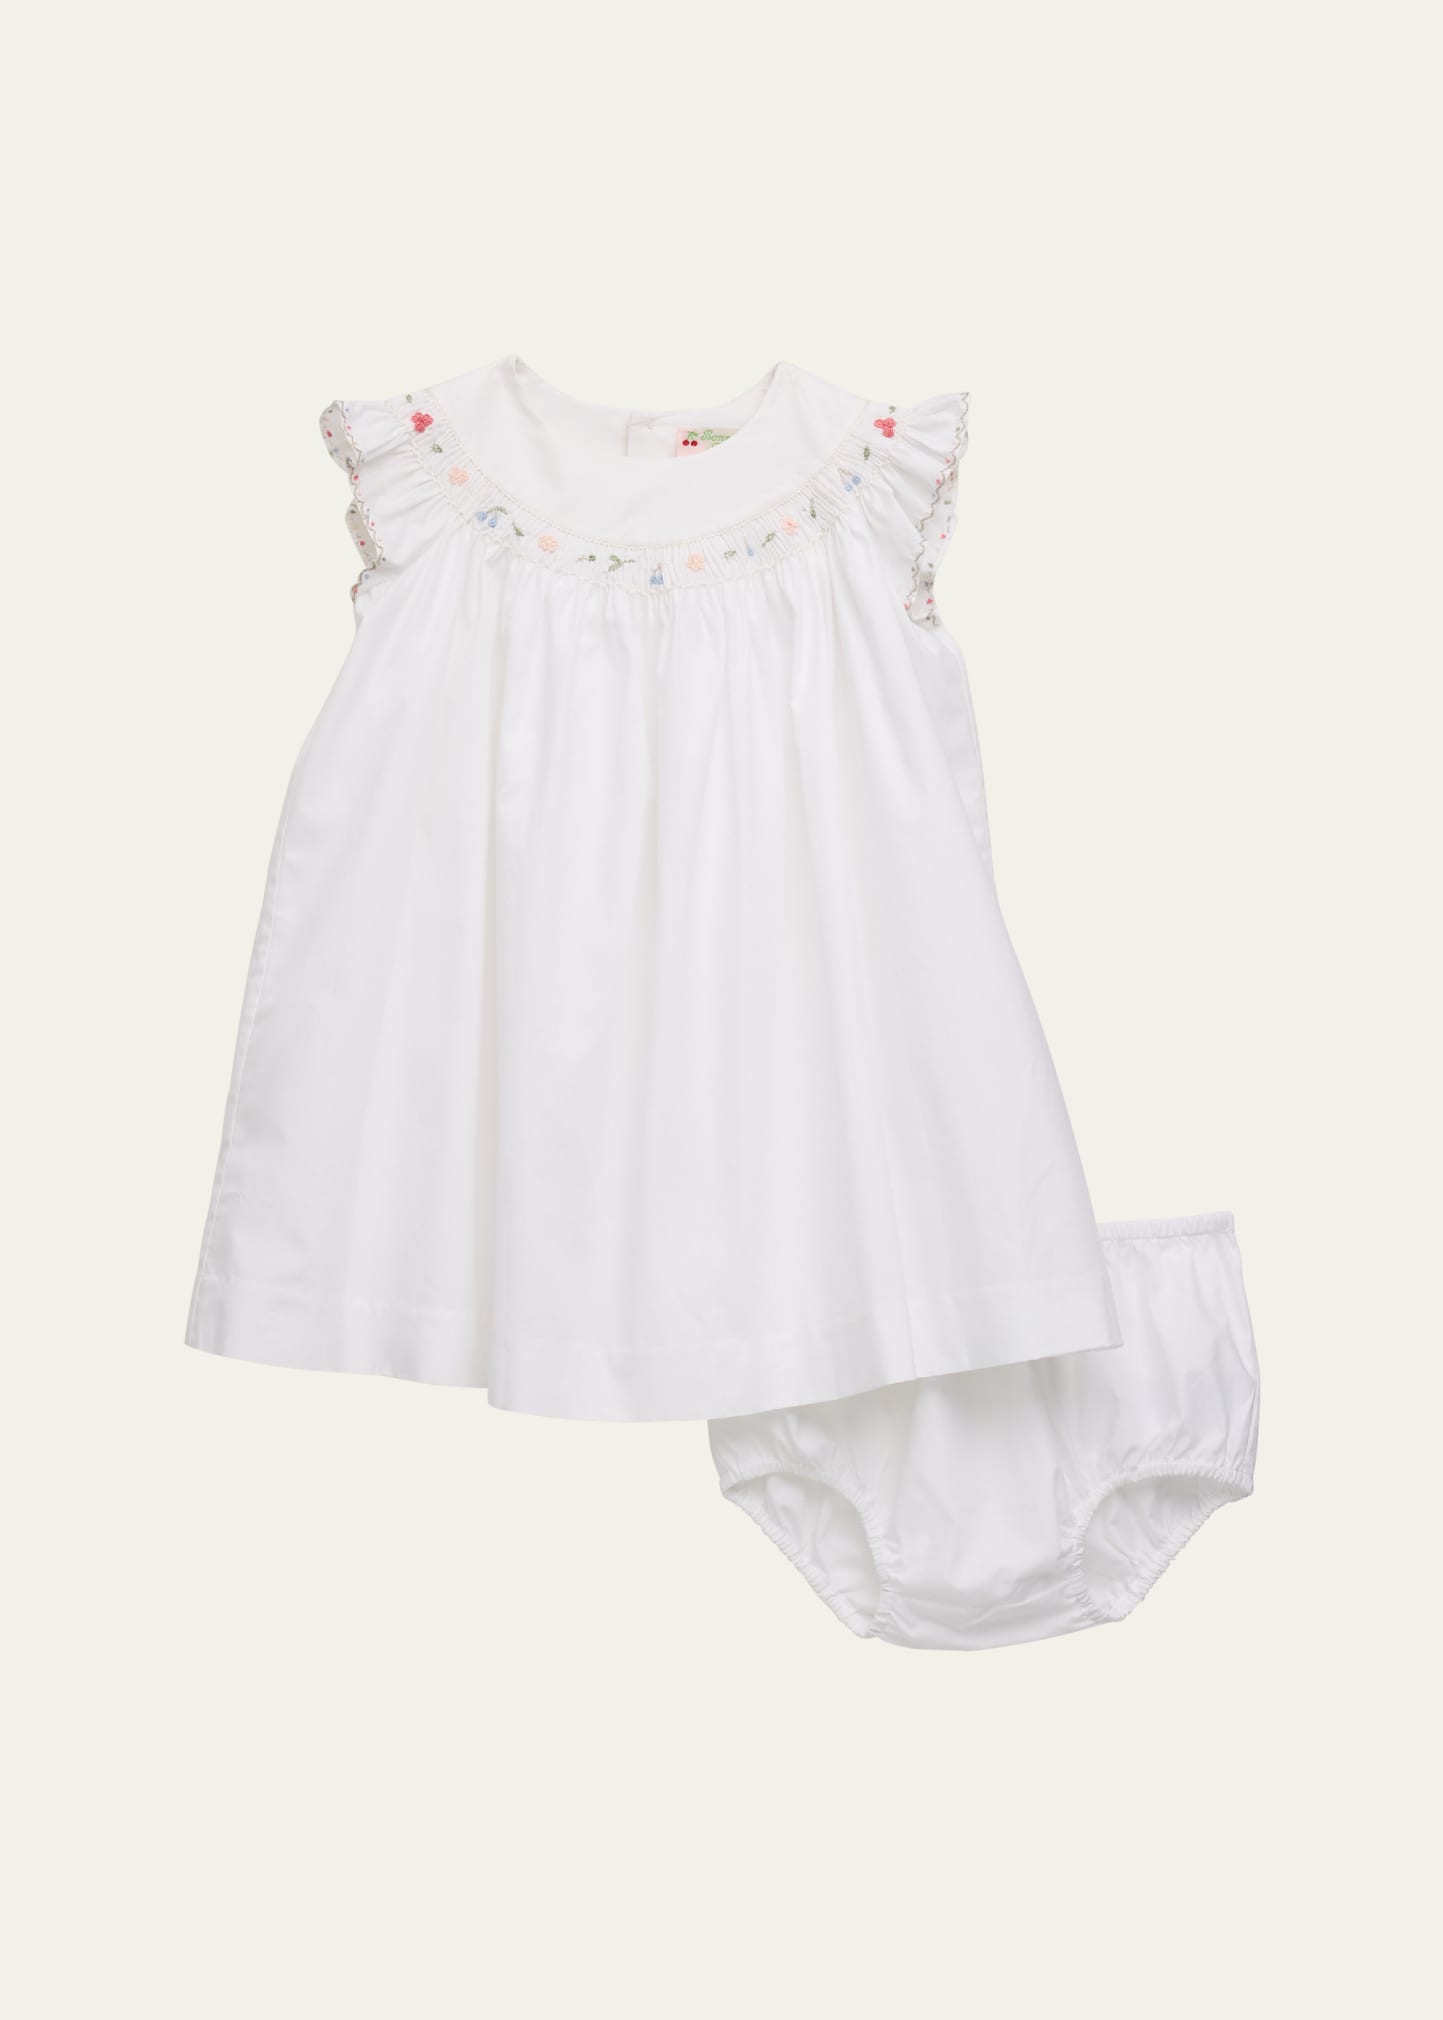 Girl's Amantine Dress W/ Floral Details & Bloomers, Size 6M-3